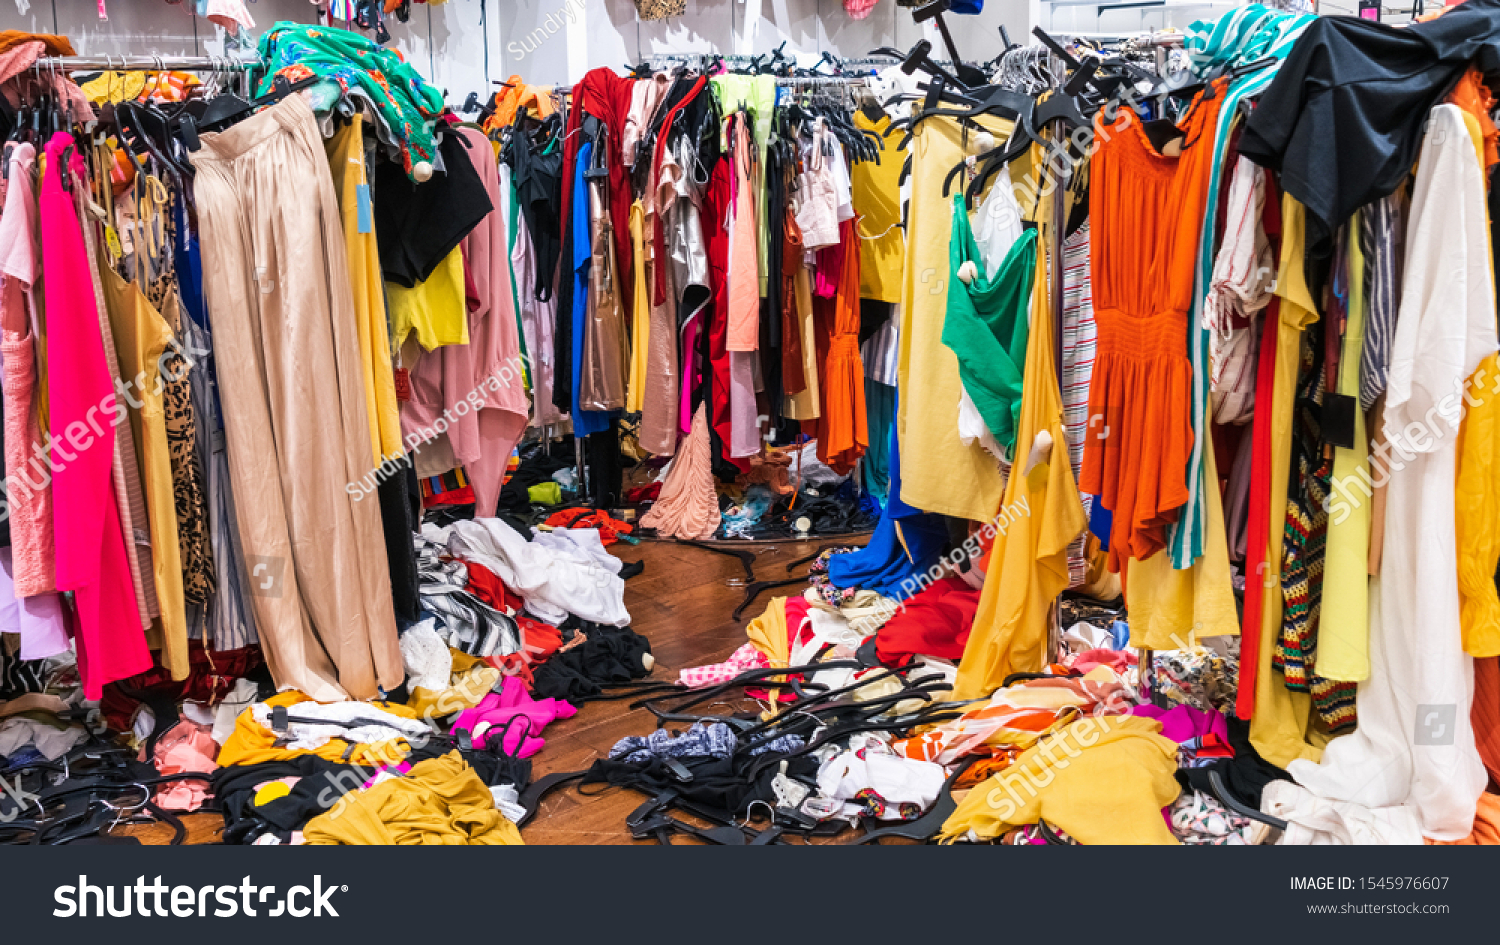 Messy clearance section in a clothing store, with colorful garments on racks and on the floor; fast fashion concept #1545976607